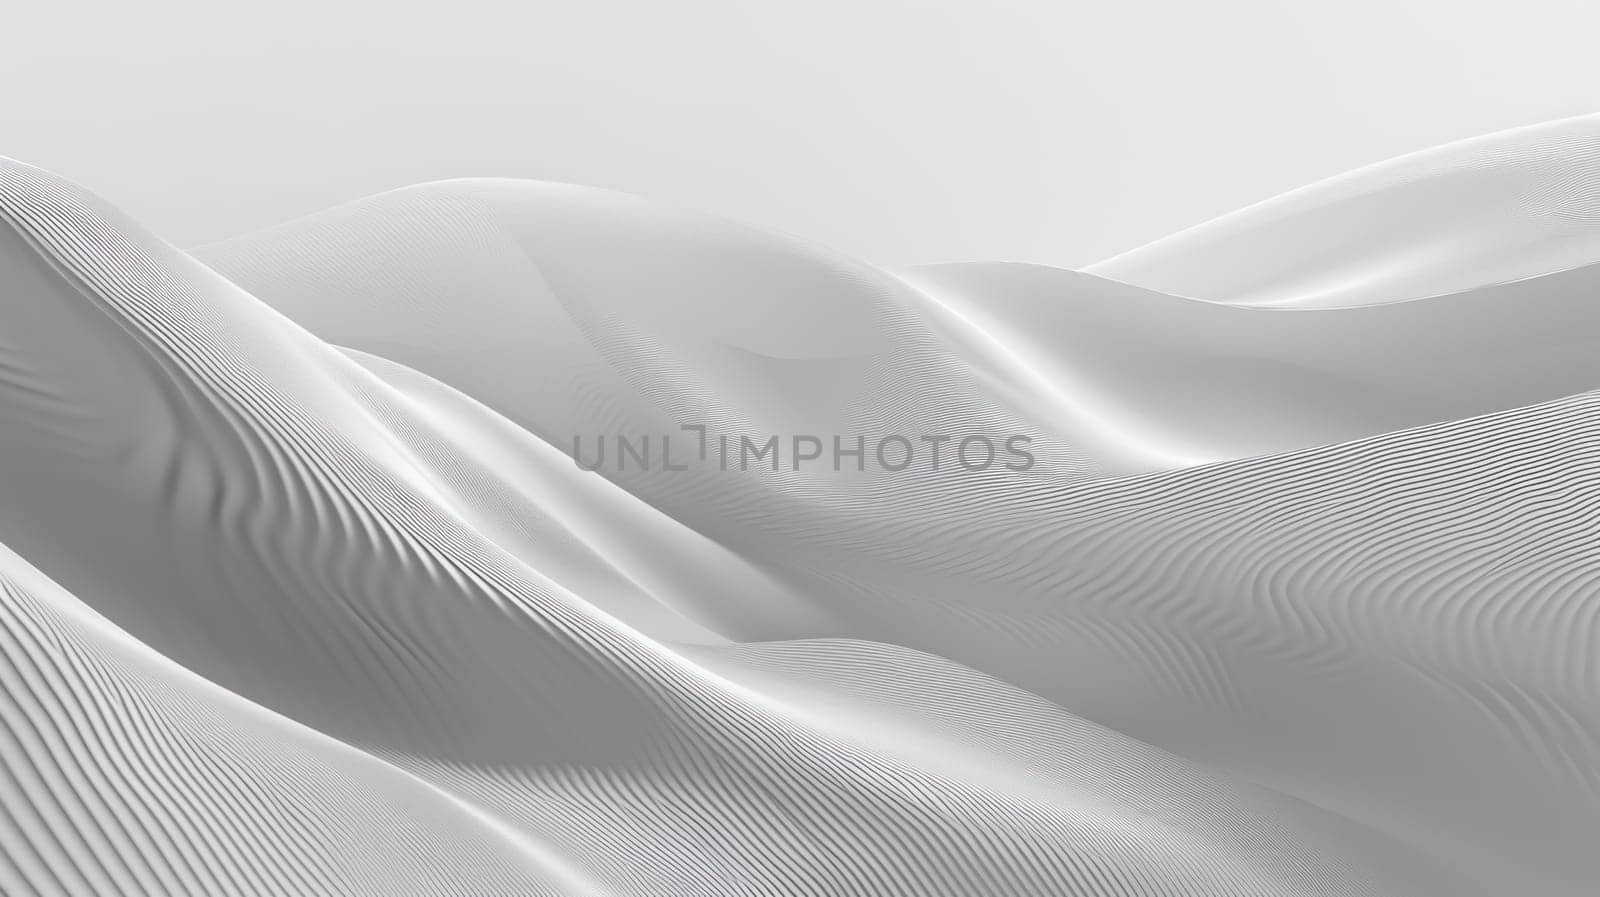 Serene monochrome waves. Created using AI generated technology and image editing software.